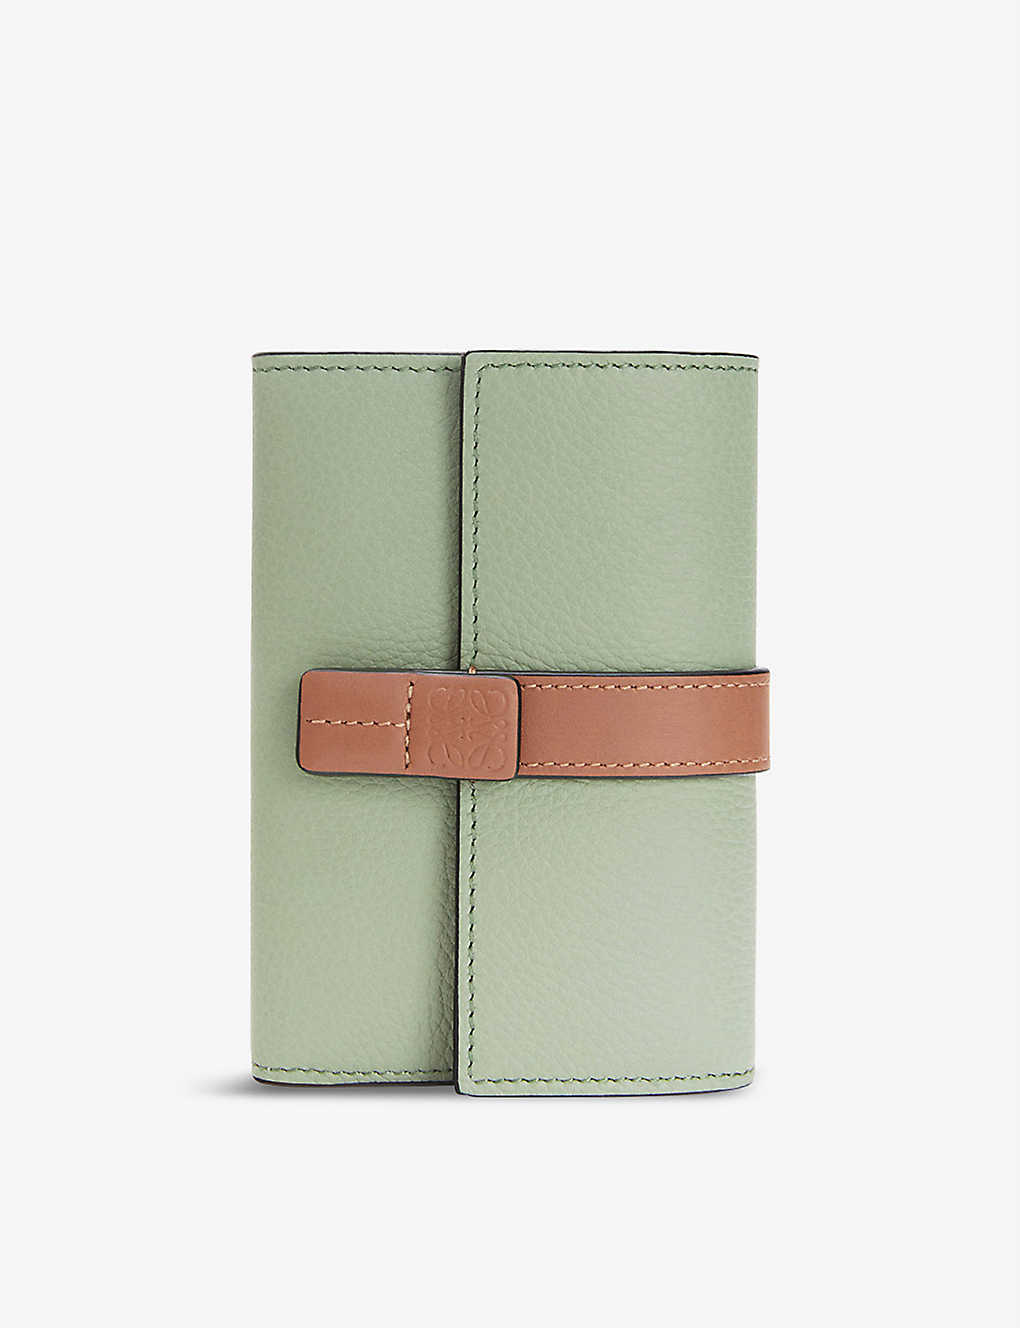 Shop Loewe Women's Rosemary/tan Vertical Small Leather Wallet